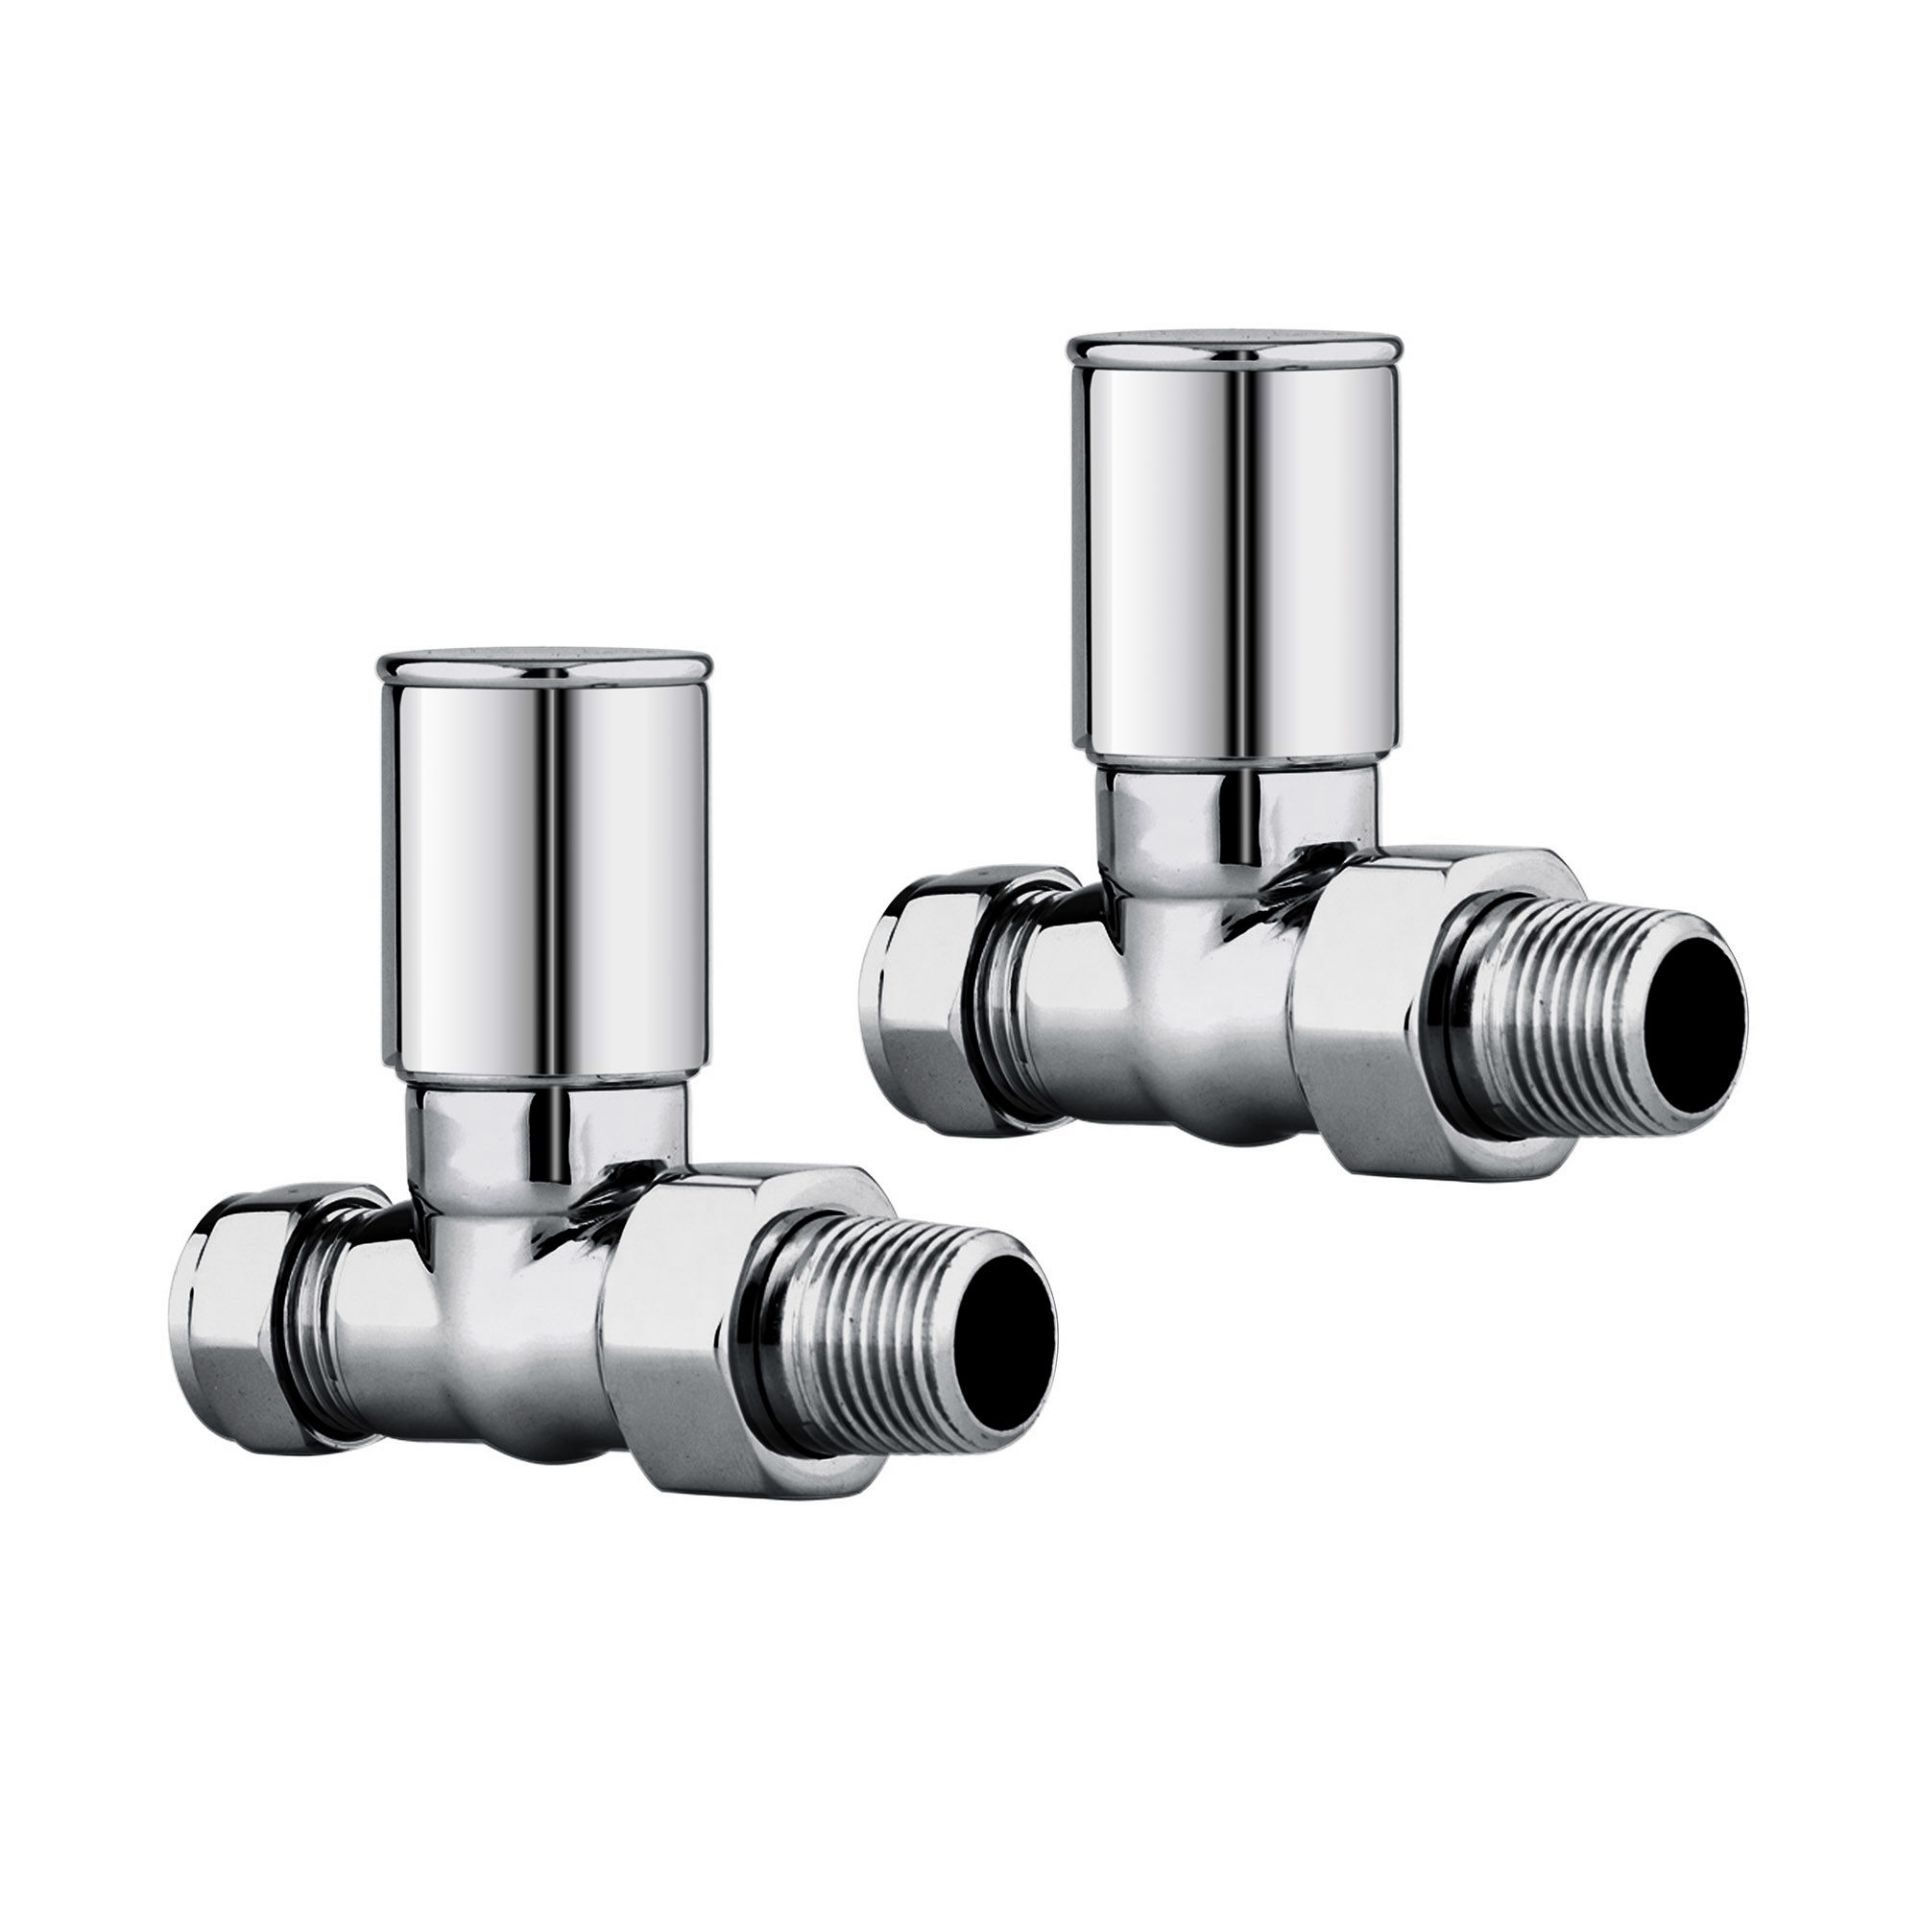 (NF104) 15mm Standard Connection Straight Radiator Valves - Heavy Duty Polished Chrome Plated